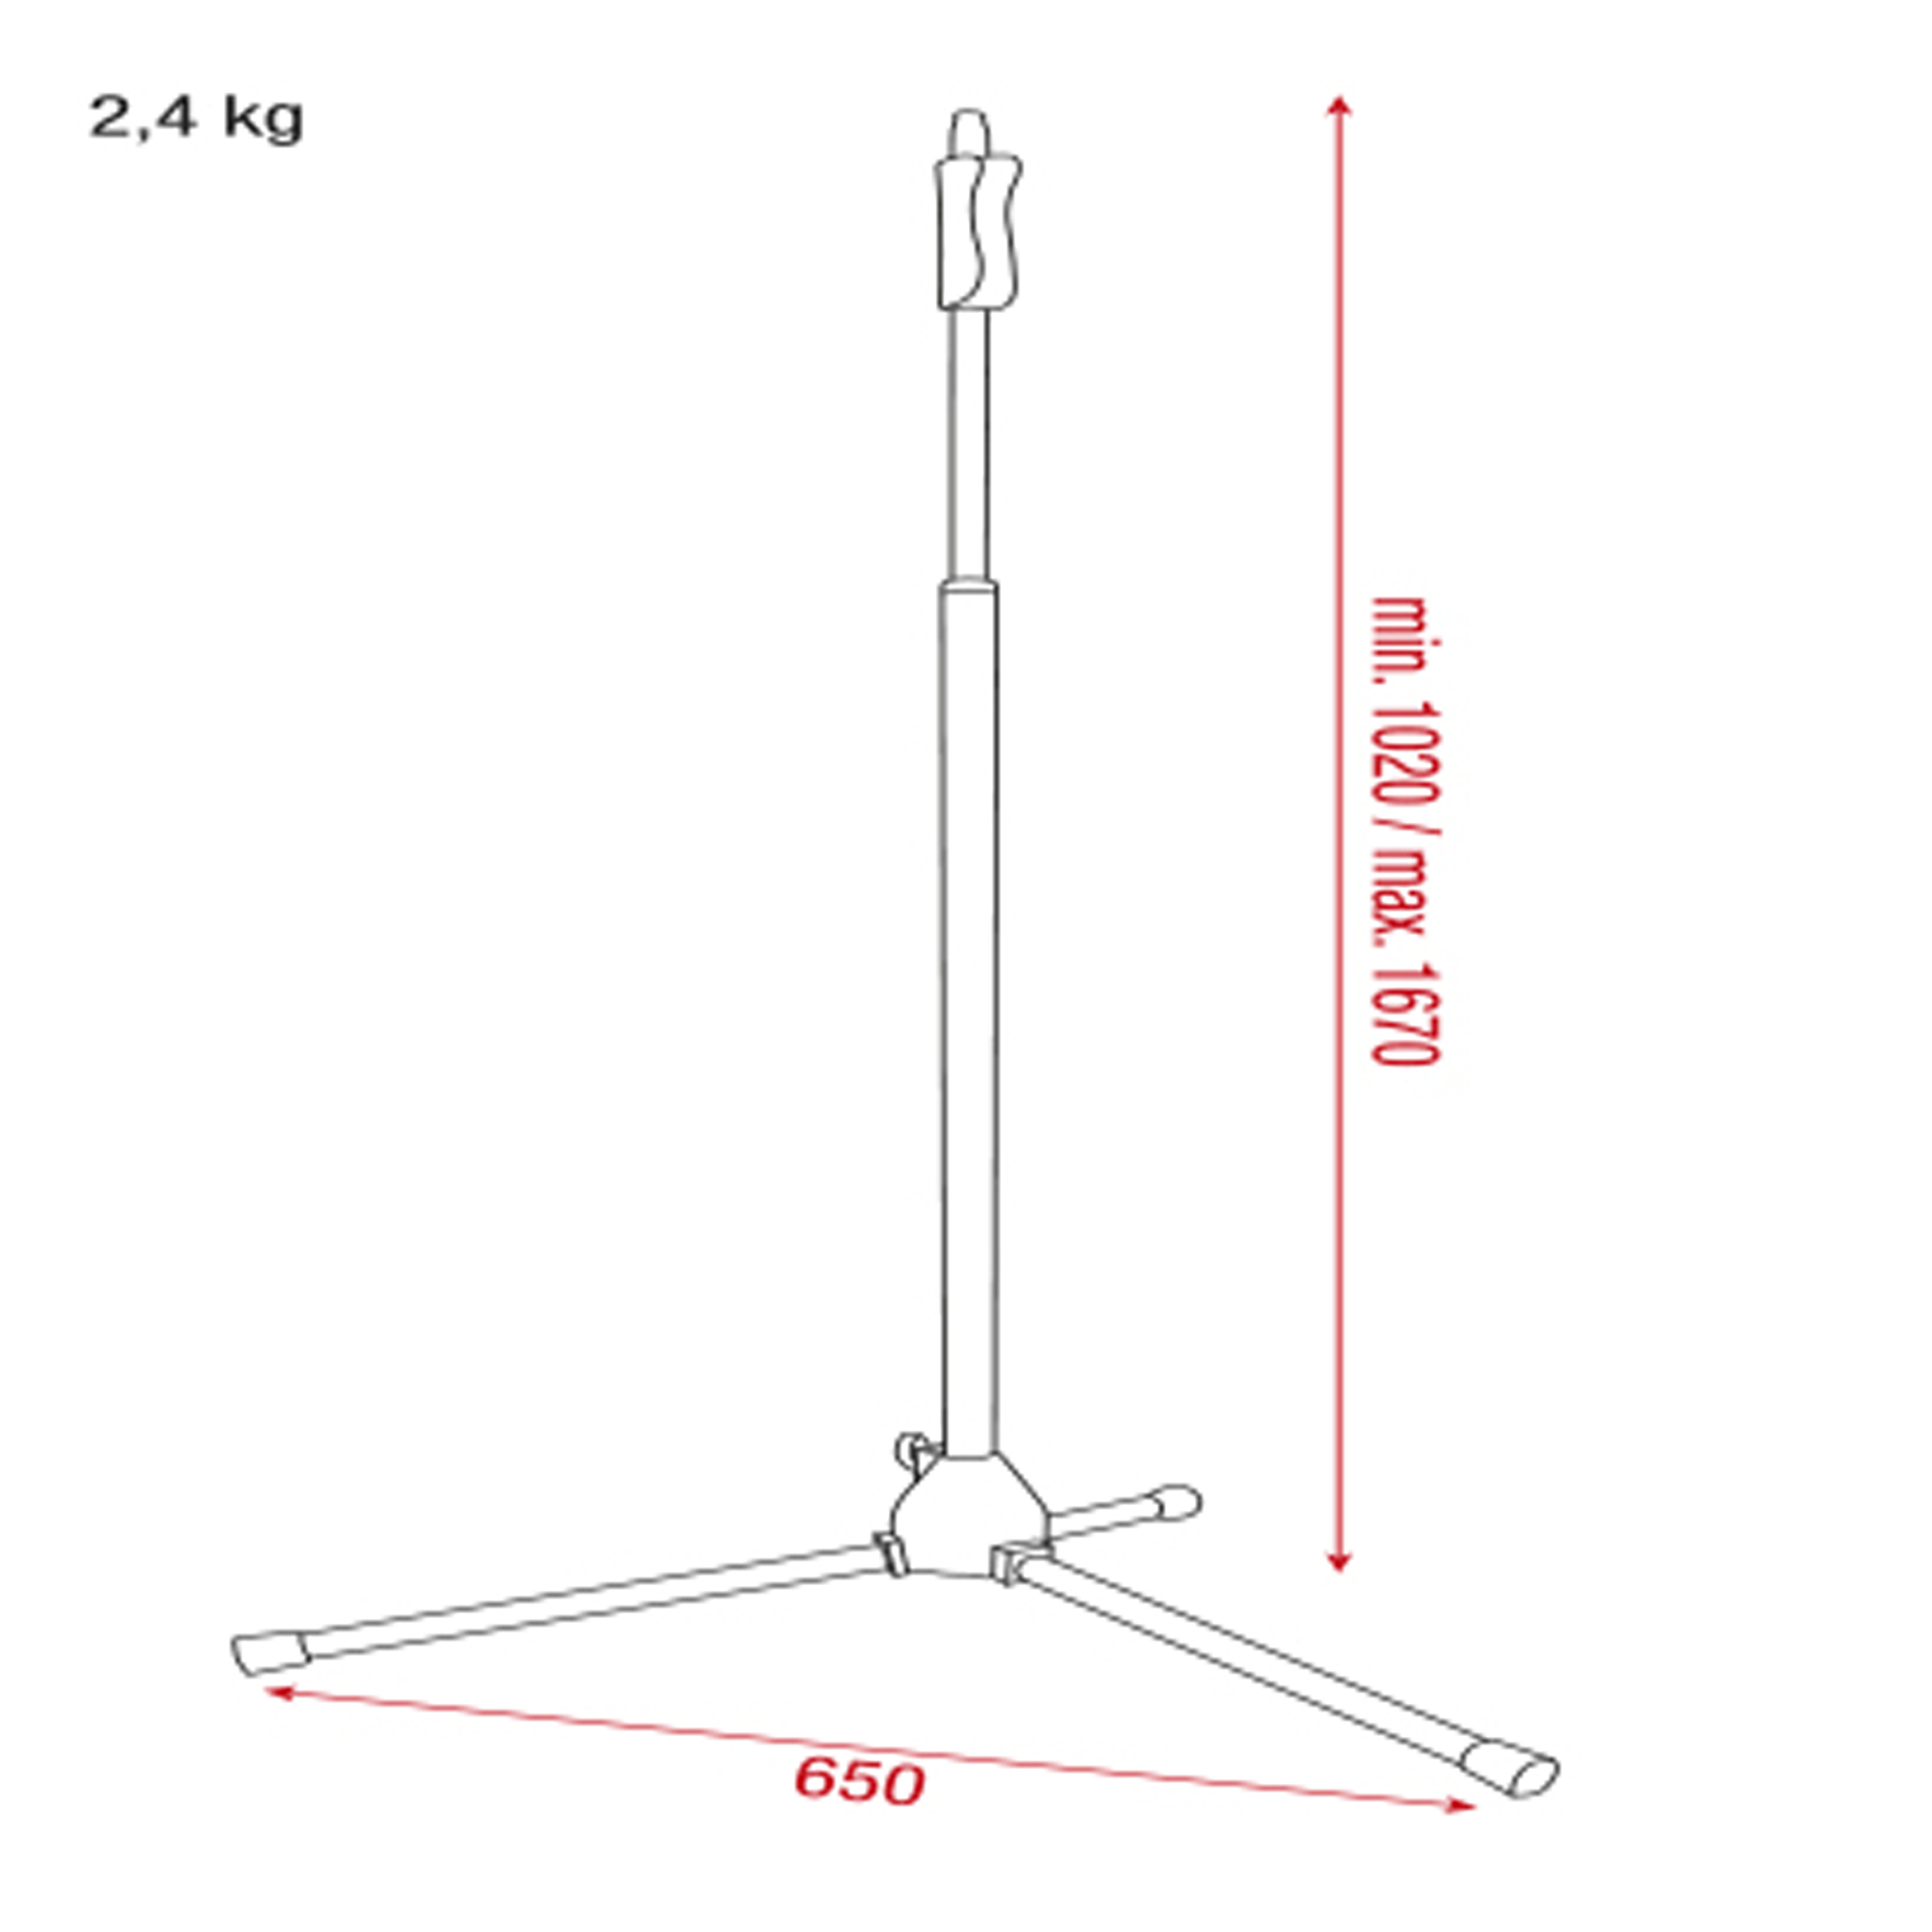 Showgear Microphone Stand - Quick Lock 1020-1670mm